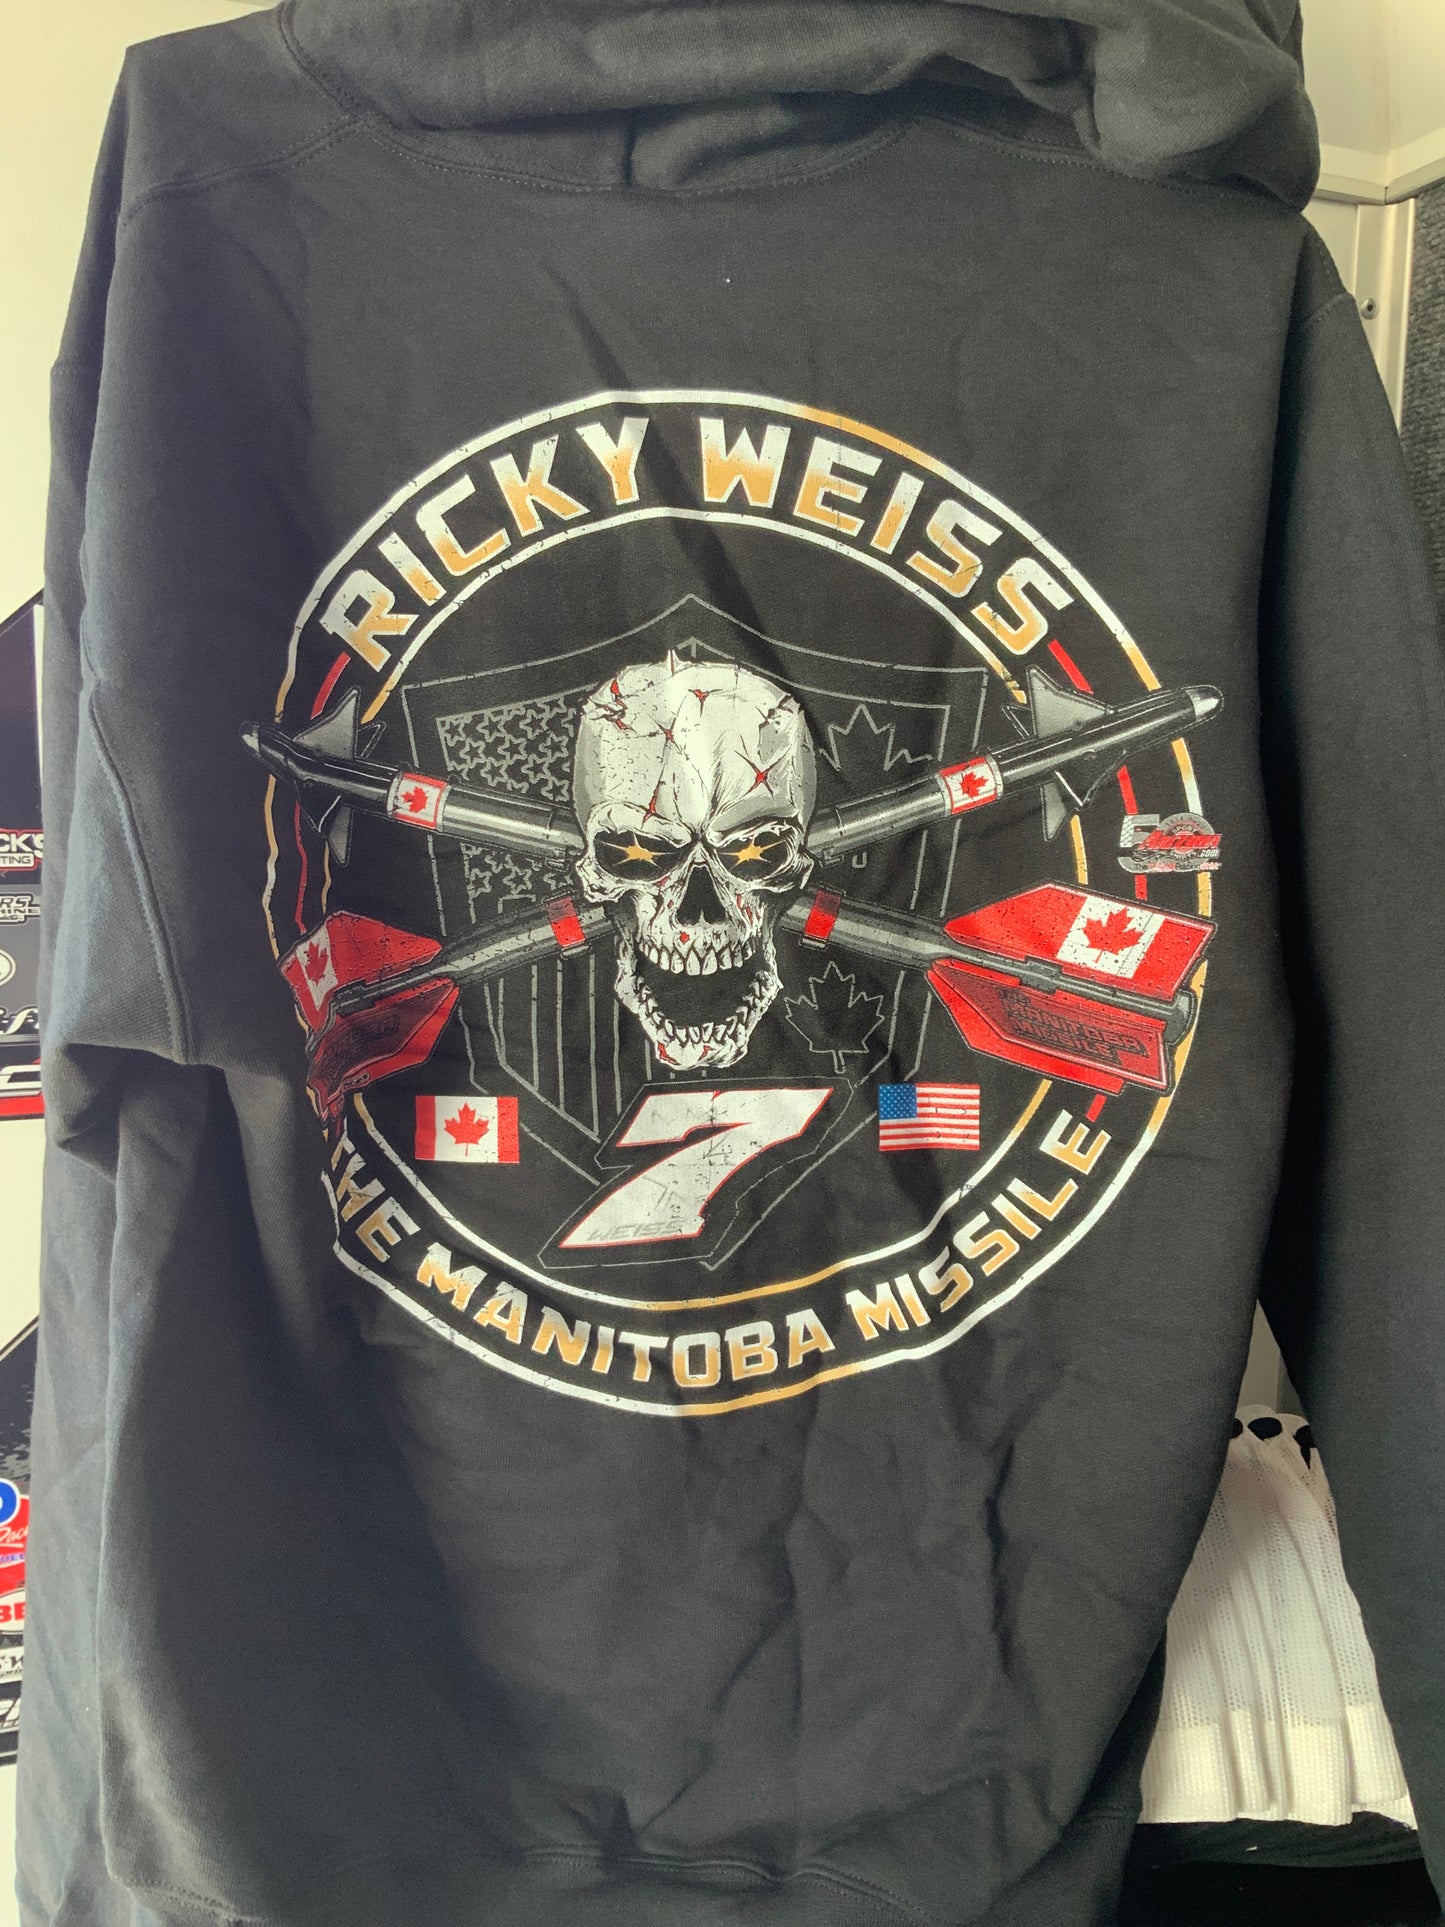 Ricky Weiss #7 Stamp hoodie